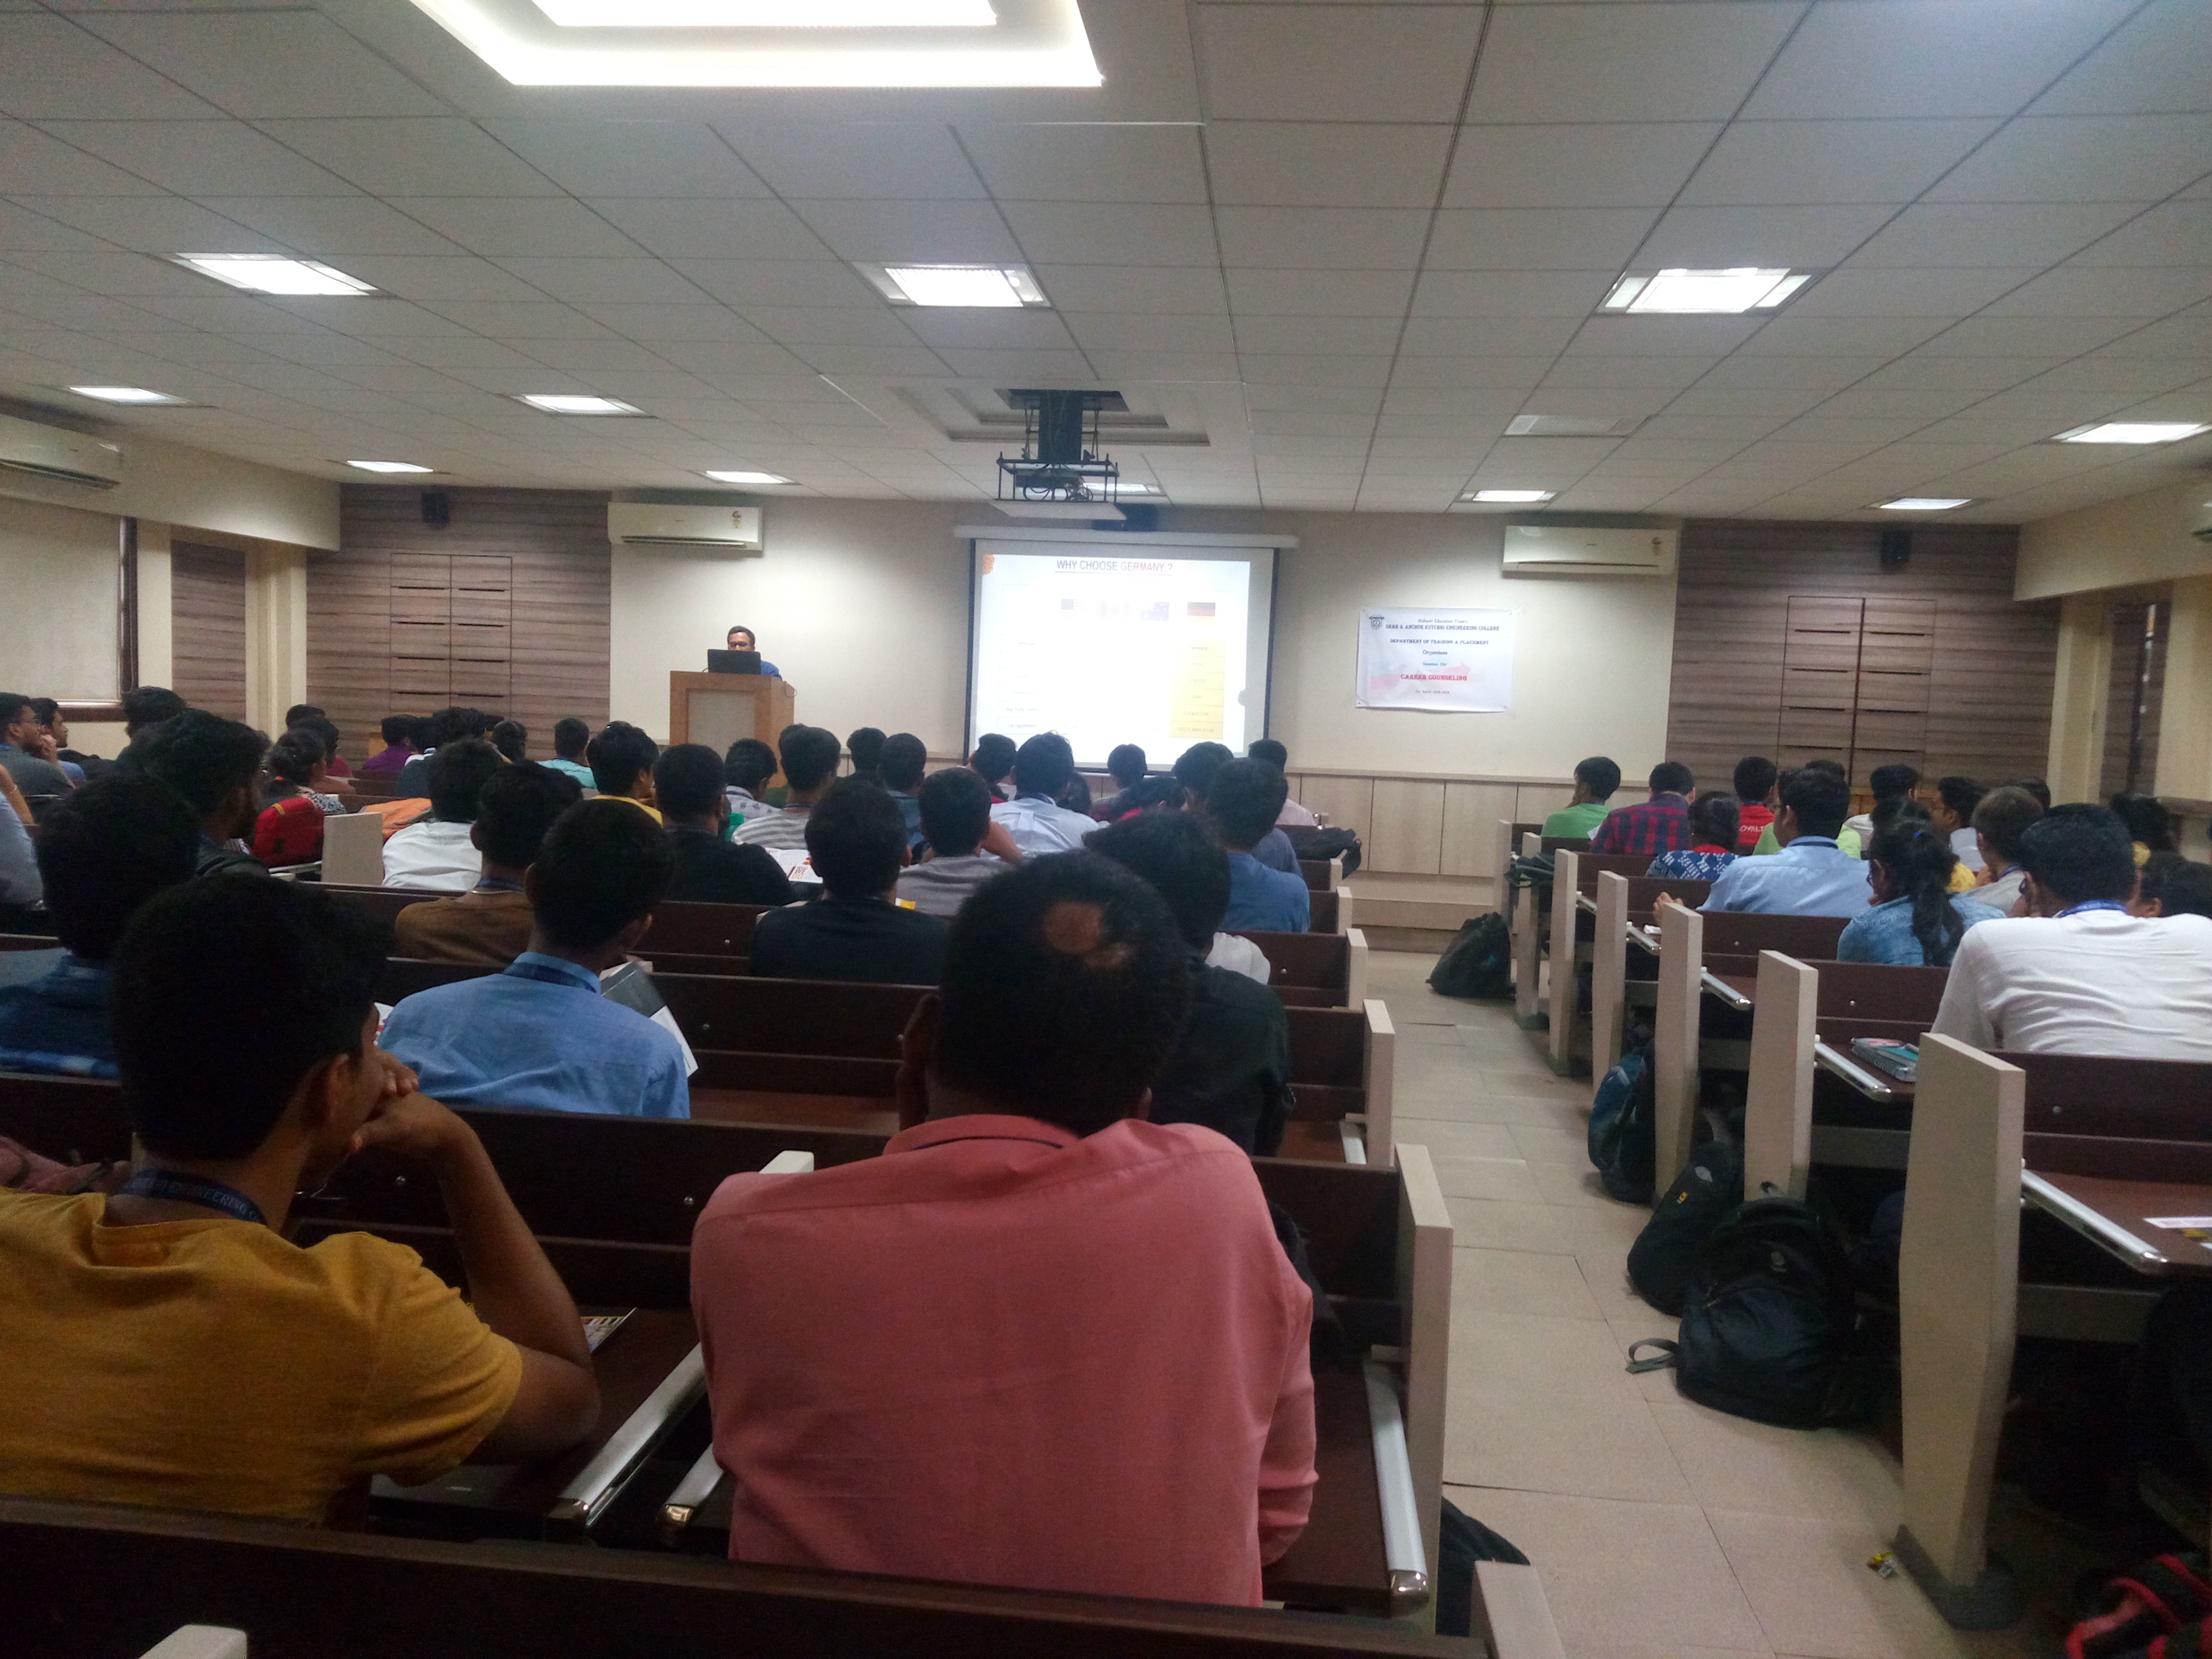 Career Guidance and Counseling Session